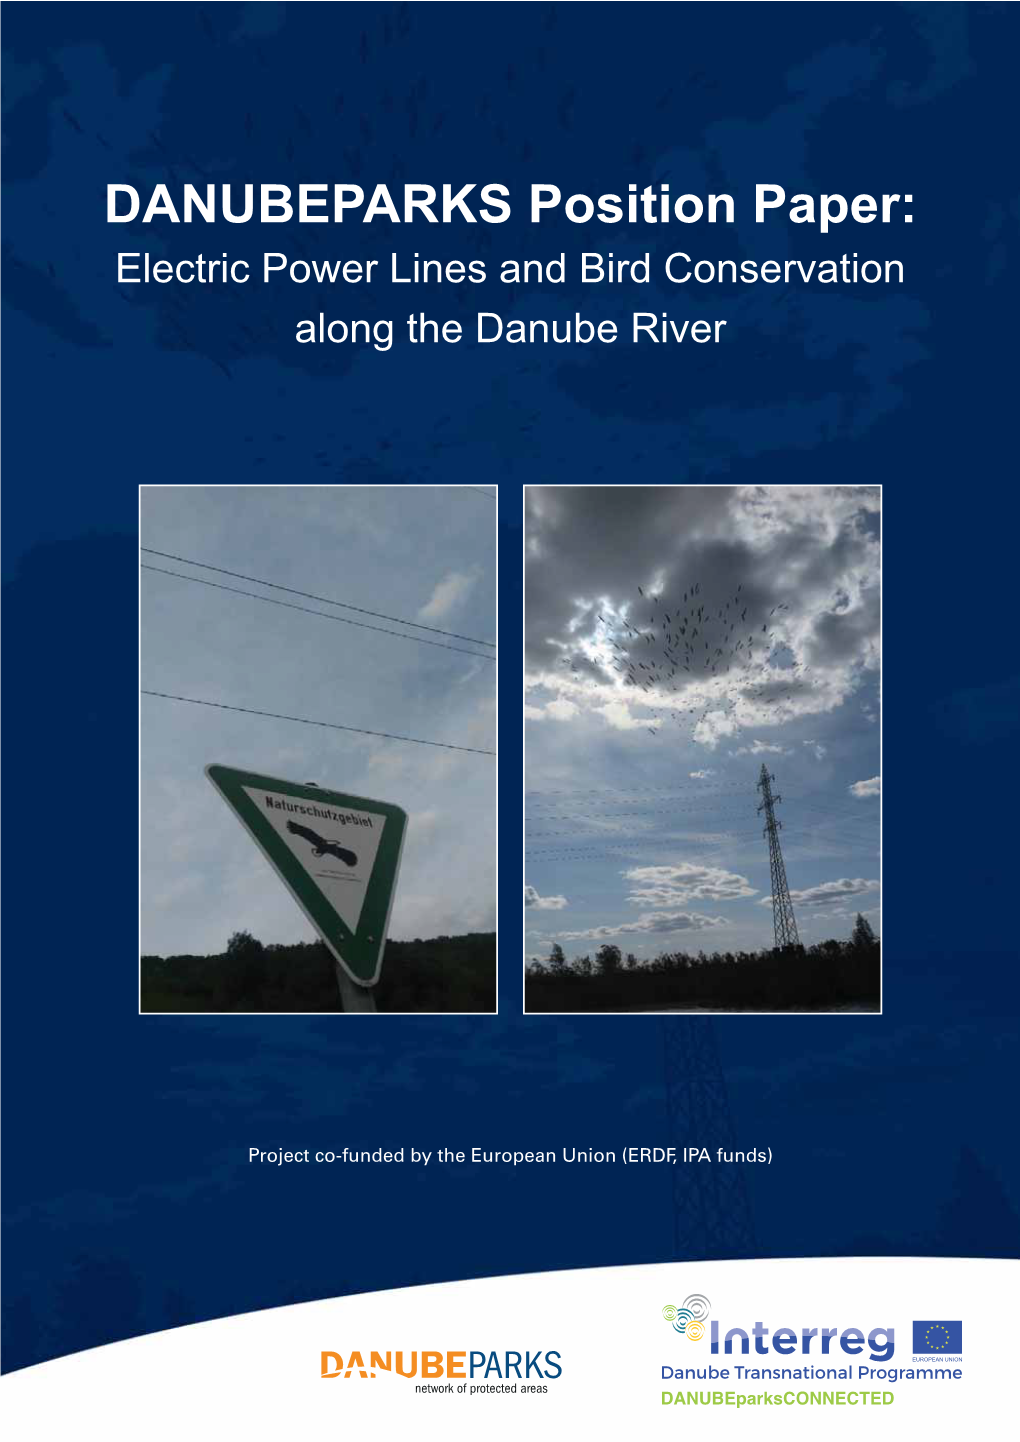 Electric Power Lines and Bird Conservation Along the Danube River